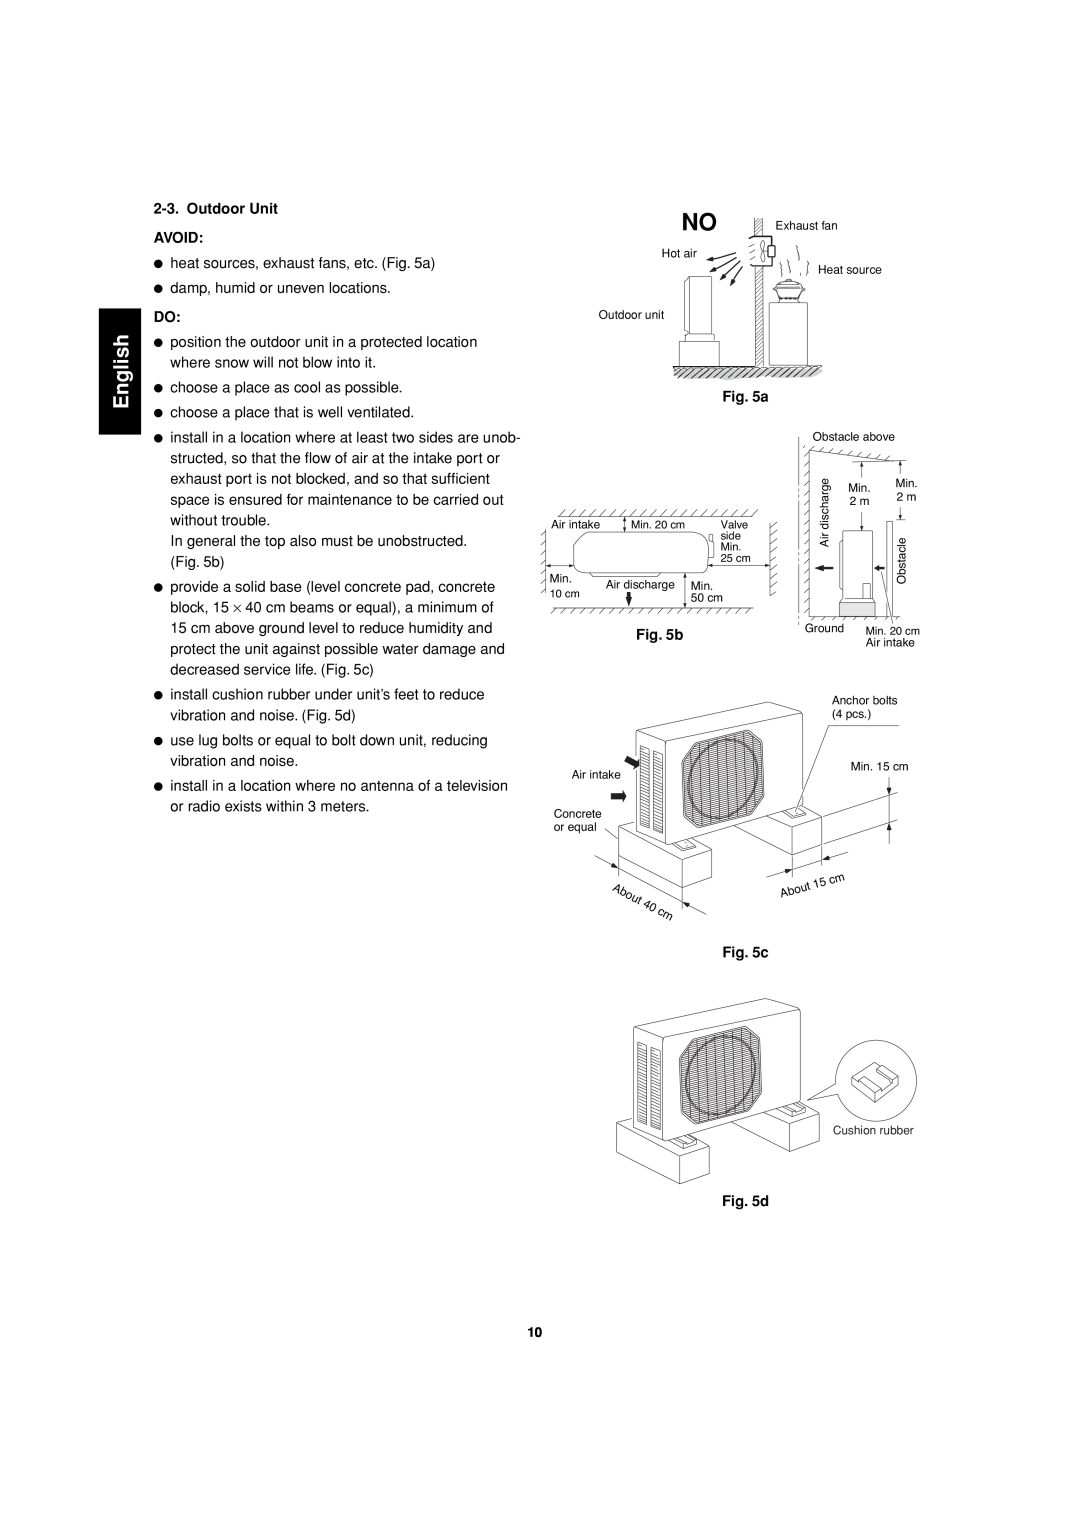 Sanyo SAP-CMRV1426EH-F, SAP-CMRV1926EH service manual English, About, Outdoor Unit AVOID 